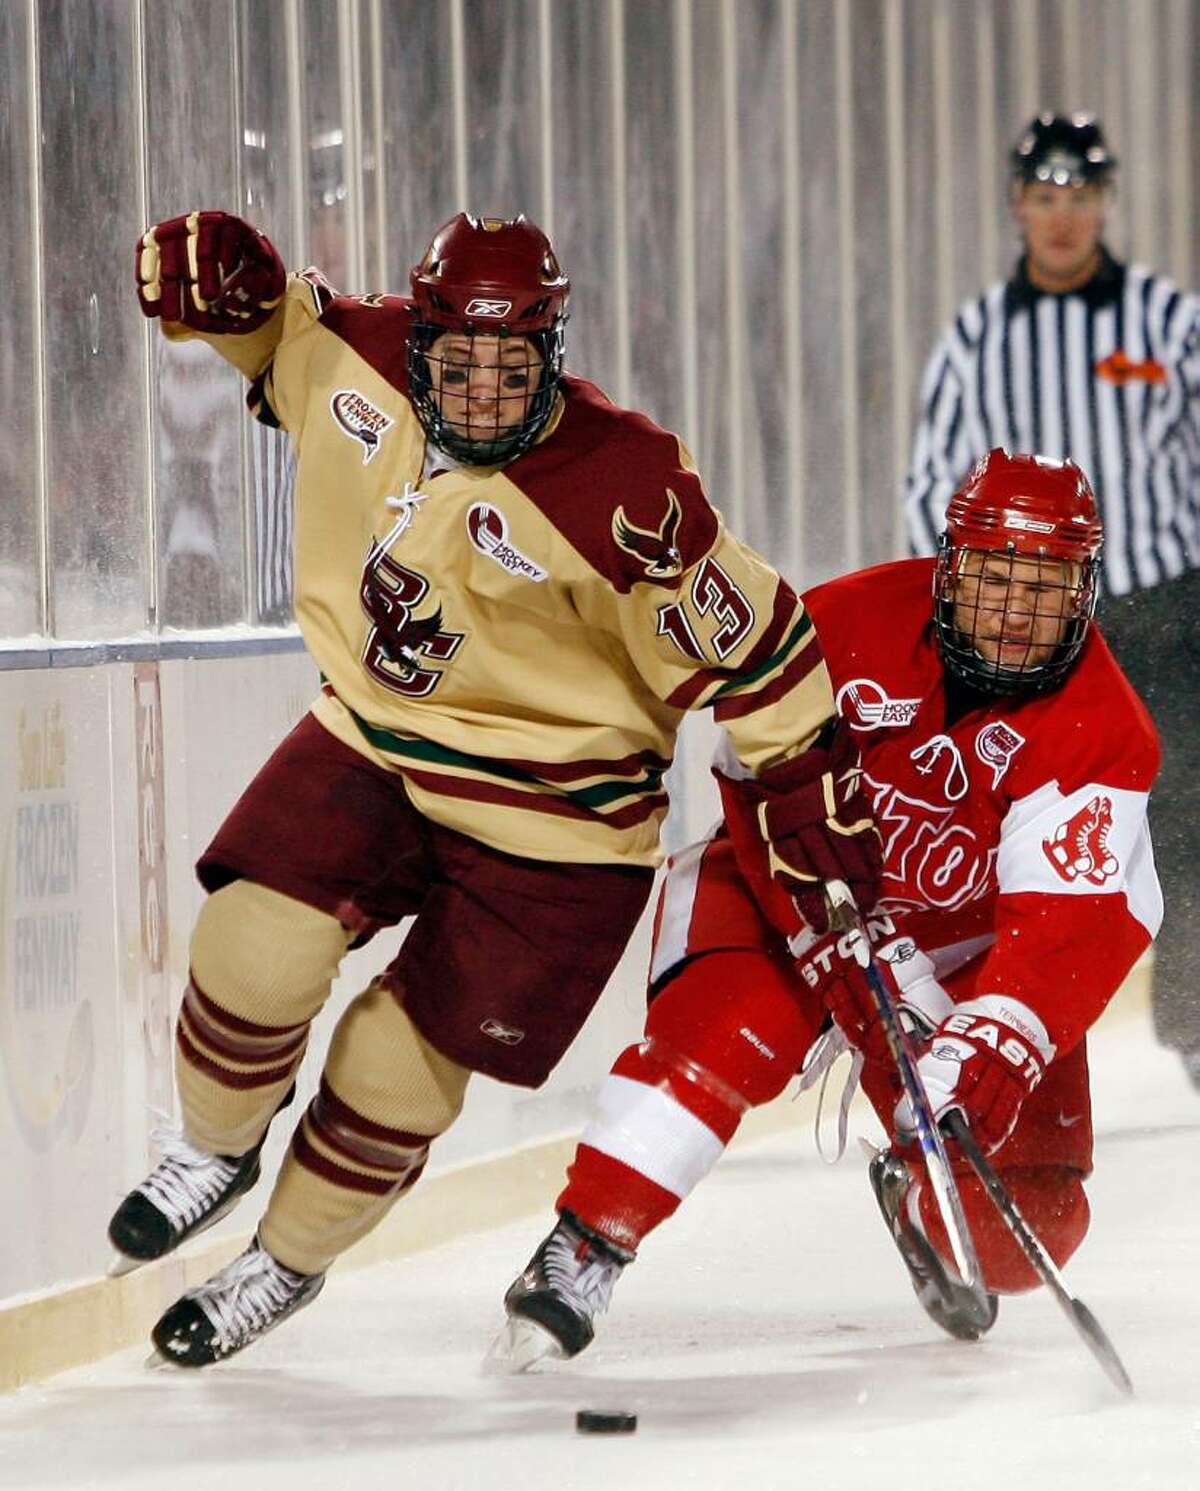 Boston College's Cam Atkinson (13) and Boston University's Luke Popko (26) ight for the puck on January 8 during the Sun Life Frozen Fenway Hockey Game at Fenway Park in Boston. Atkinson and the Eagles play MIami, Ohio in the Frozen Four Thursday.